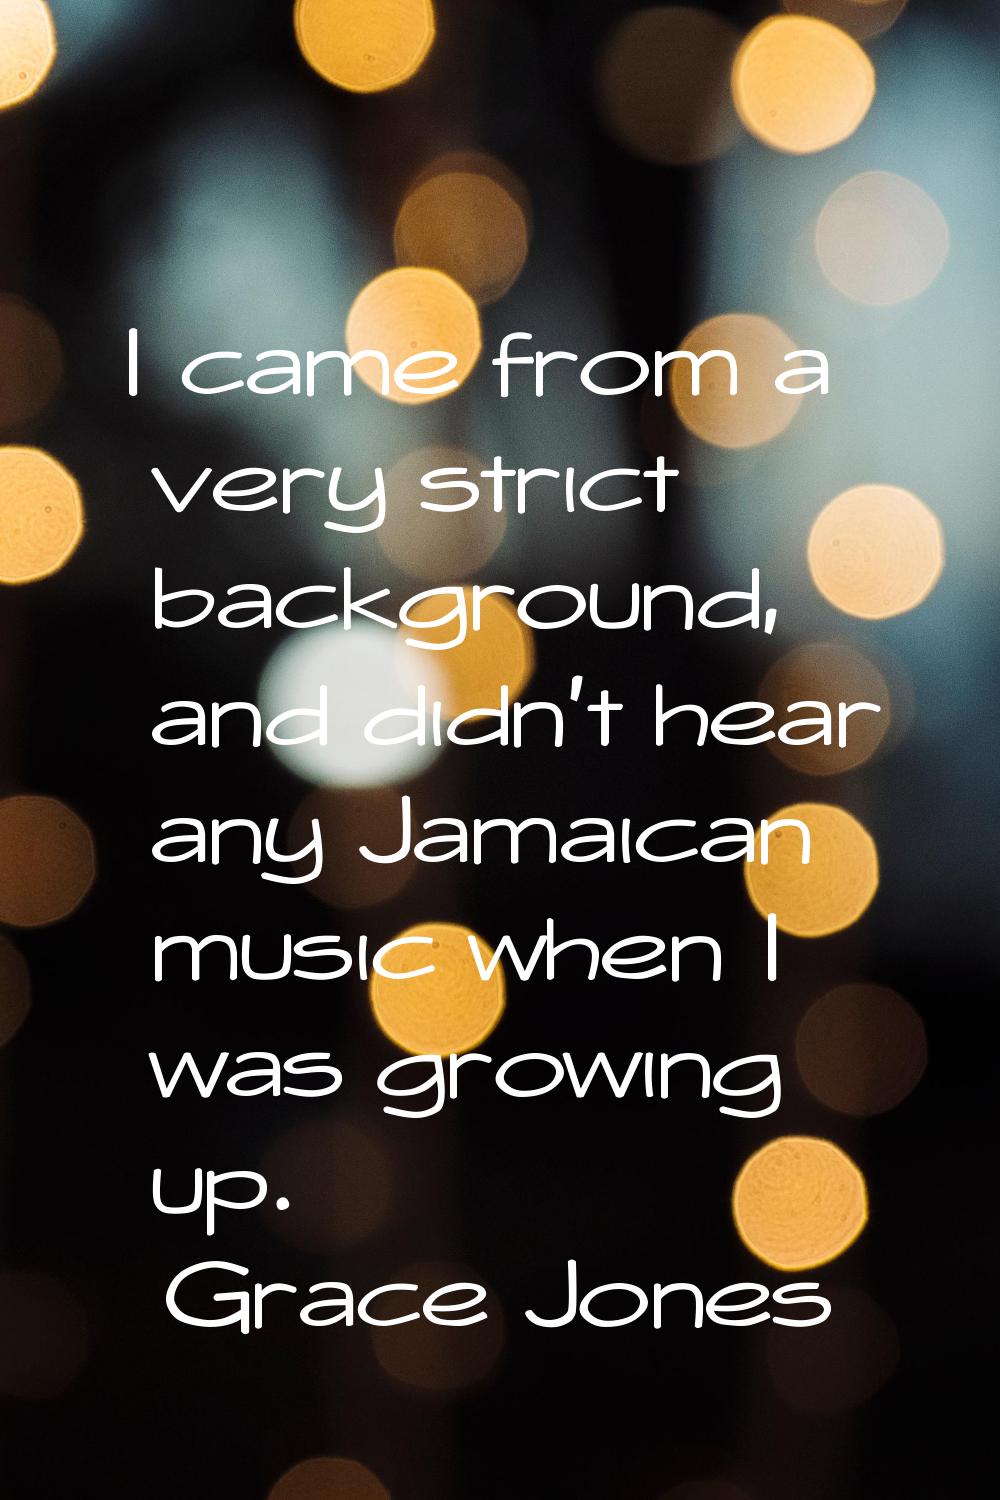 I came from a very strict background, and didn't hear any Jamaican music when I was growing up.